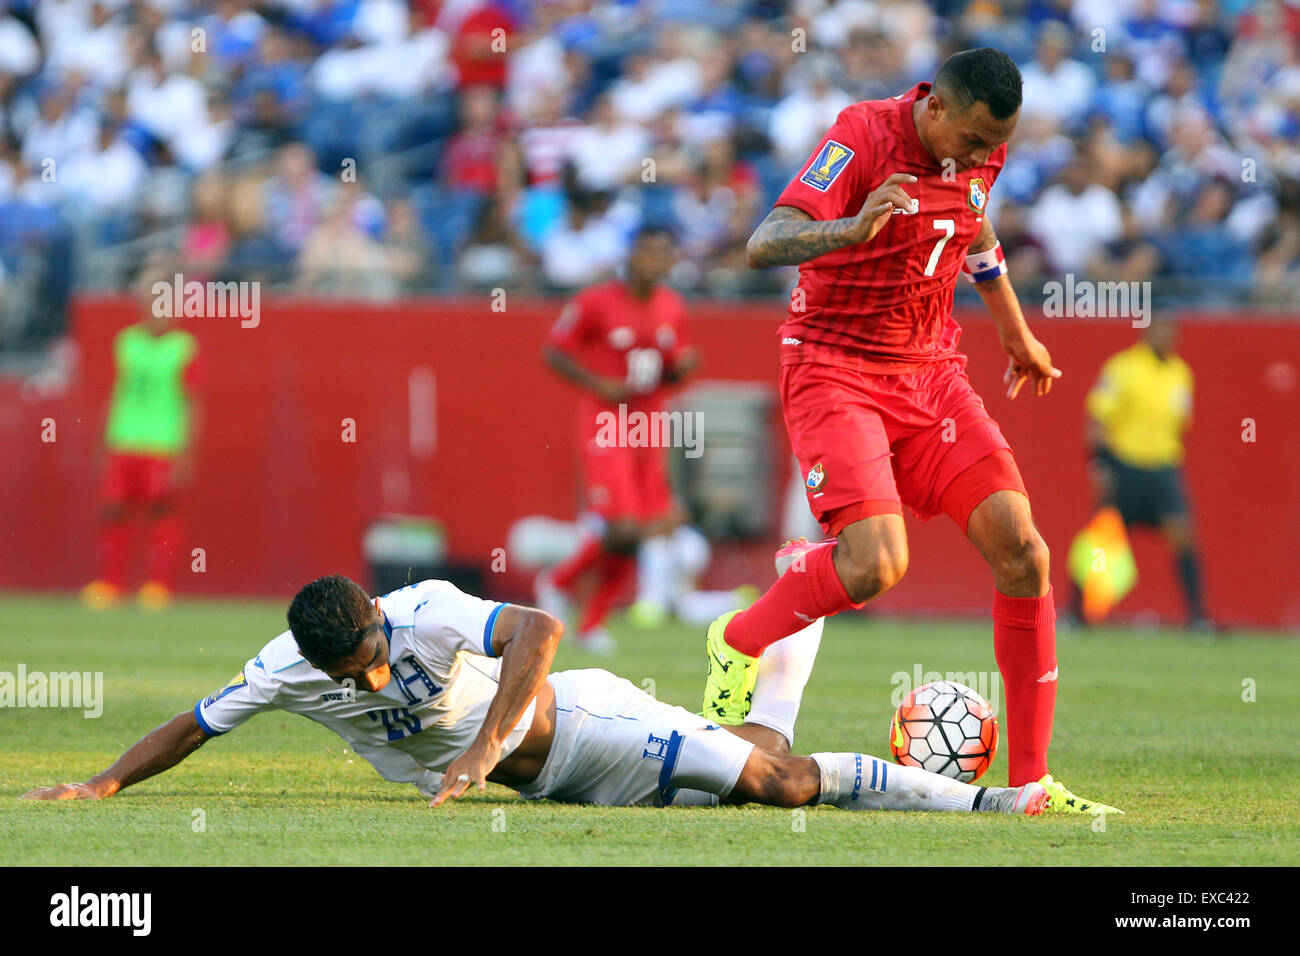 July 10, 2015; Foxborough, MA, USA; Honduras midfielder Jorge Claros (20) and Panama forward Blas Perez (7) in action during the second half of the CONCACAF Gold Cup match between Panama and Honduras at Gillette Stadium. The match ended in a 1-1 tie. Anthony Nesmith/Cal Sport Media Stock Photo